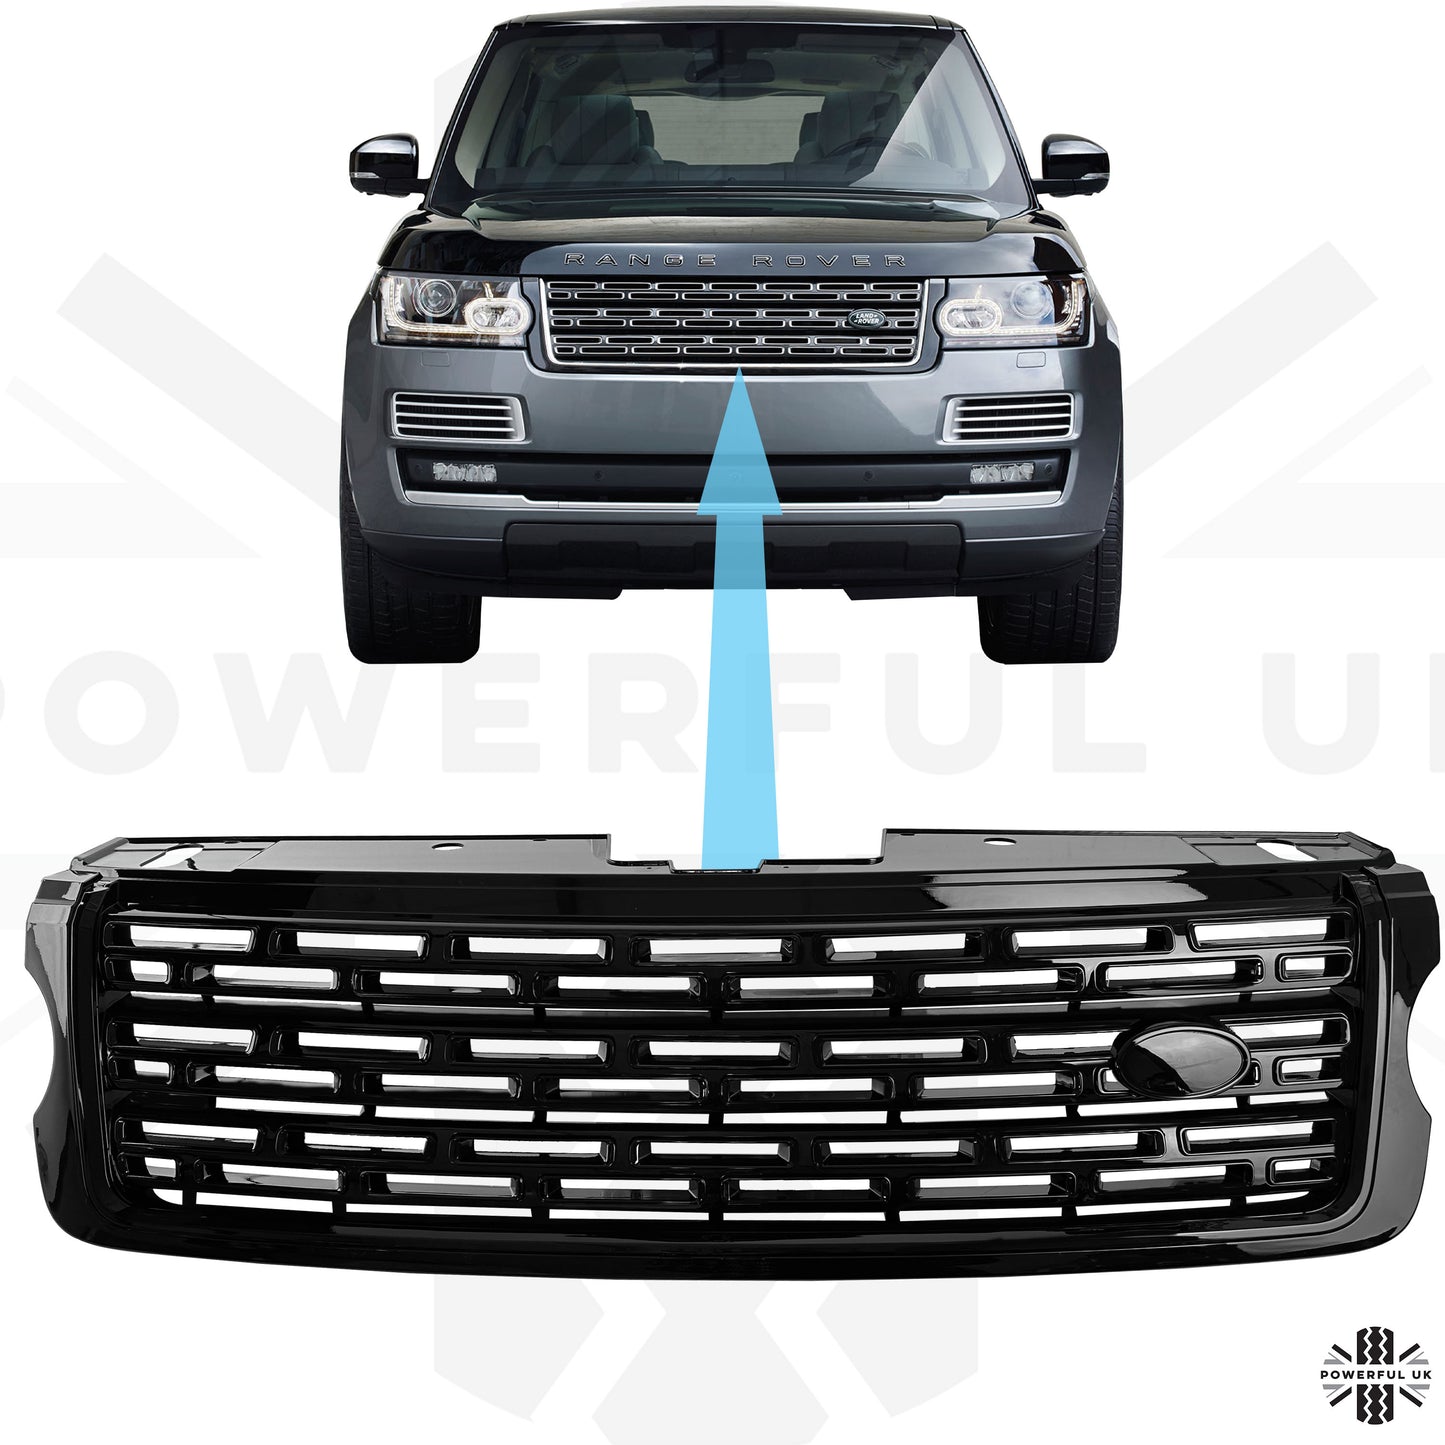 Autobiography SV Style Front Grille in full Black for Range Rover L405 2013-2017